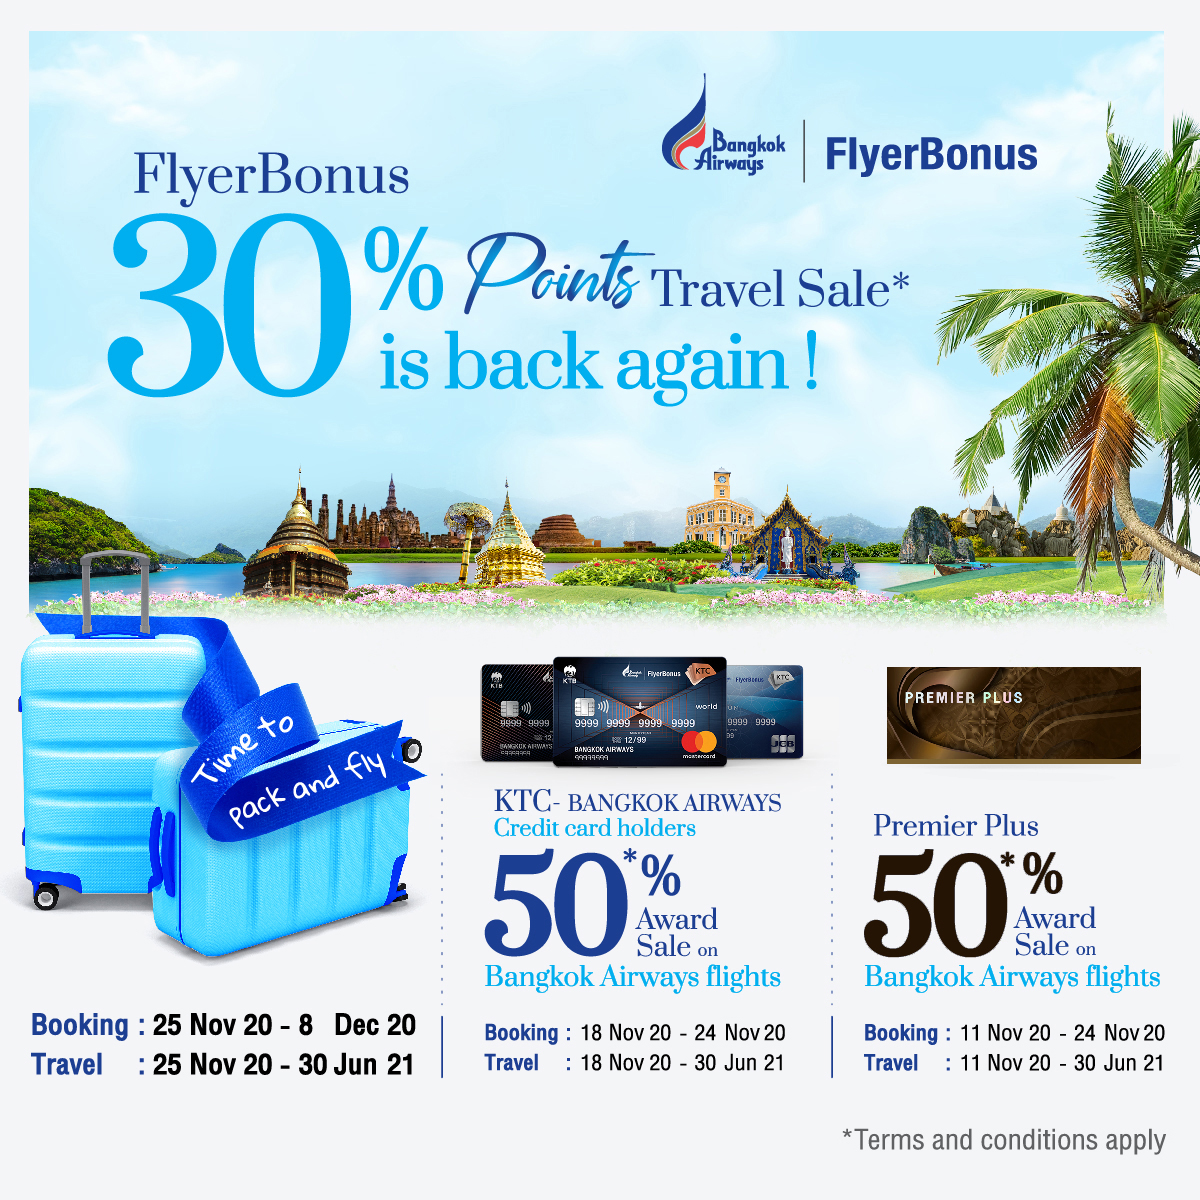 travel deals with points